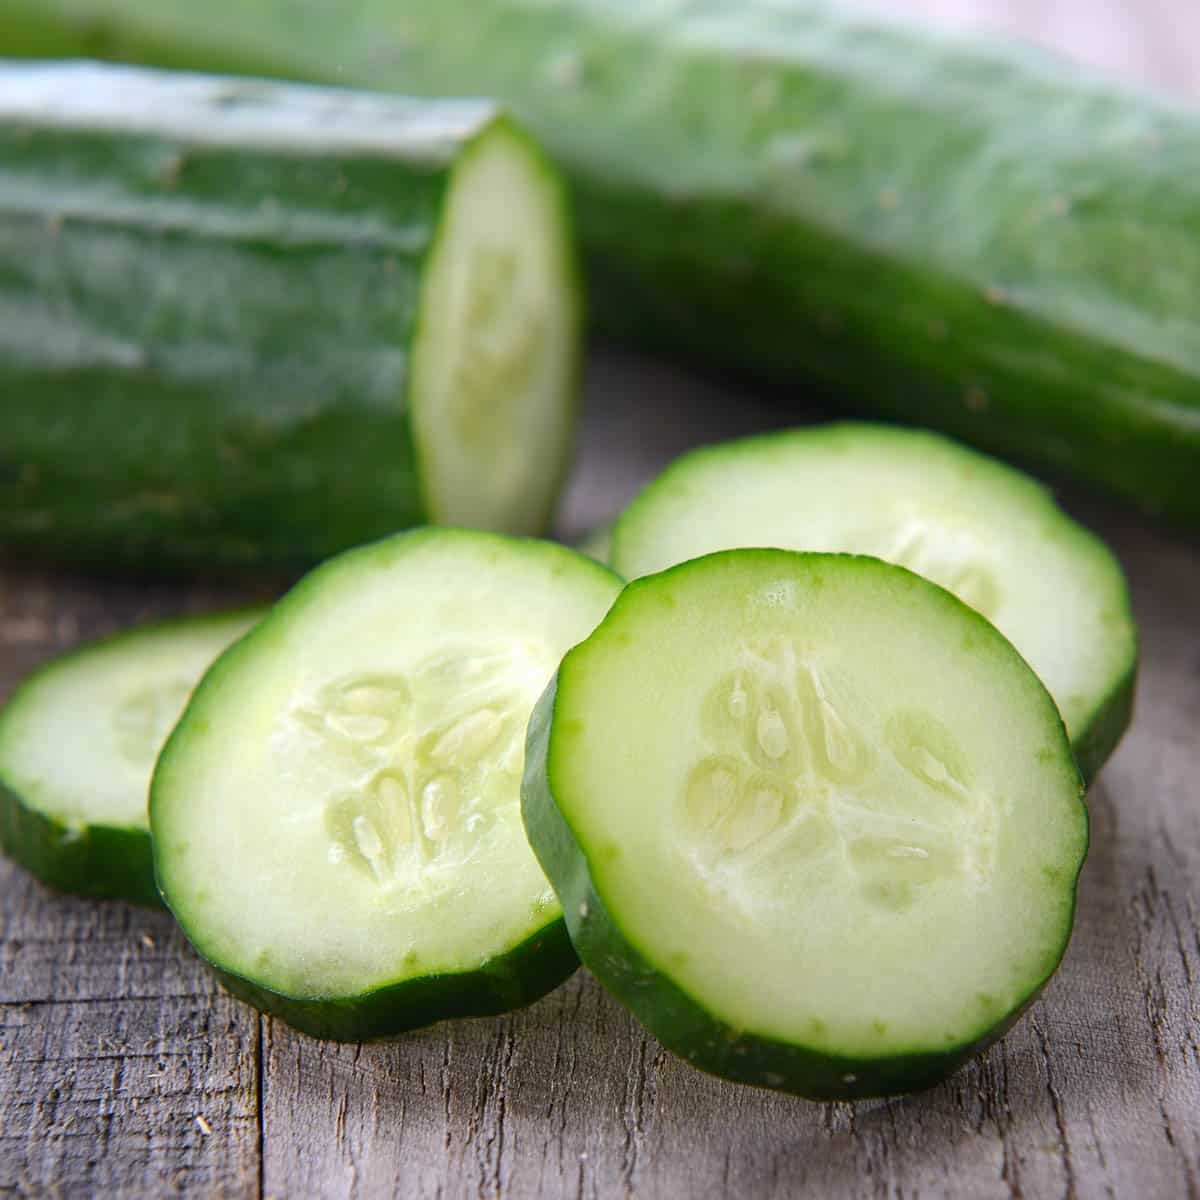 A whole cucumber next to a cut cucumber with slices.